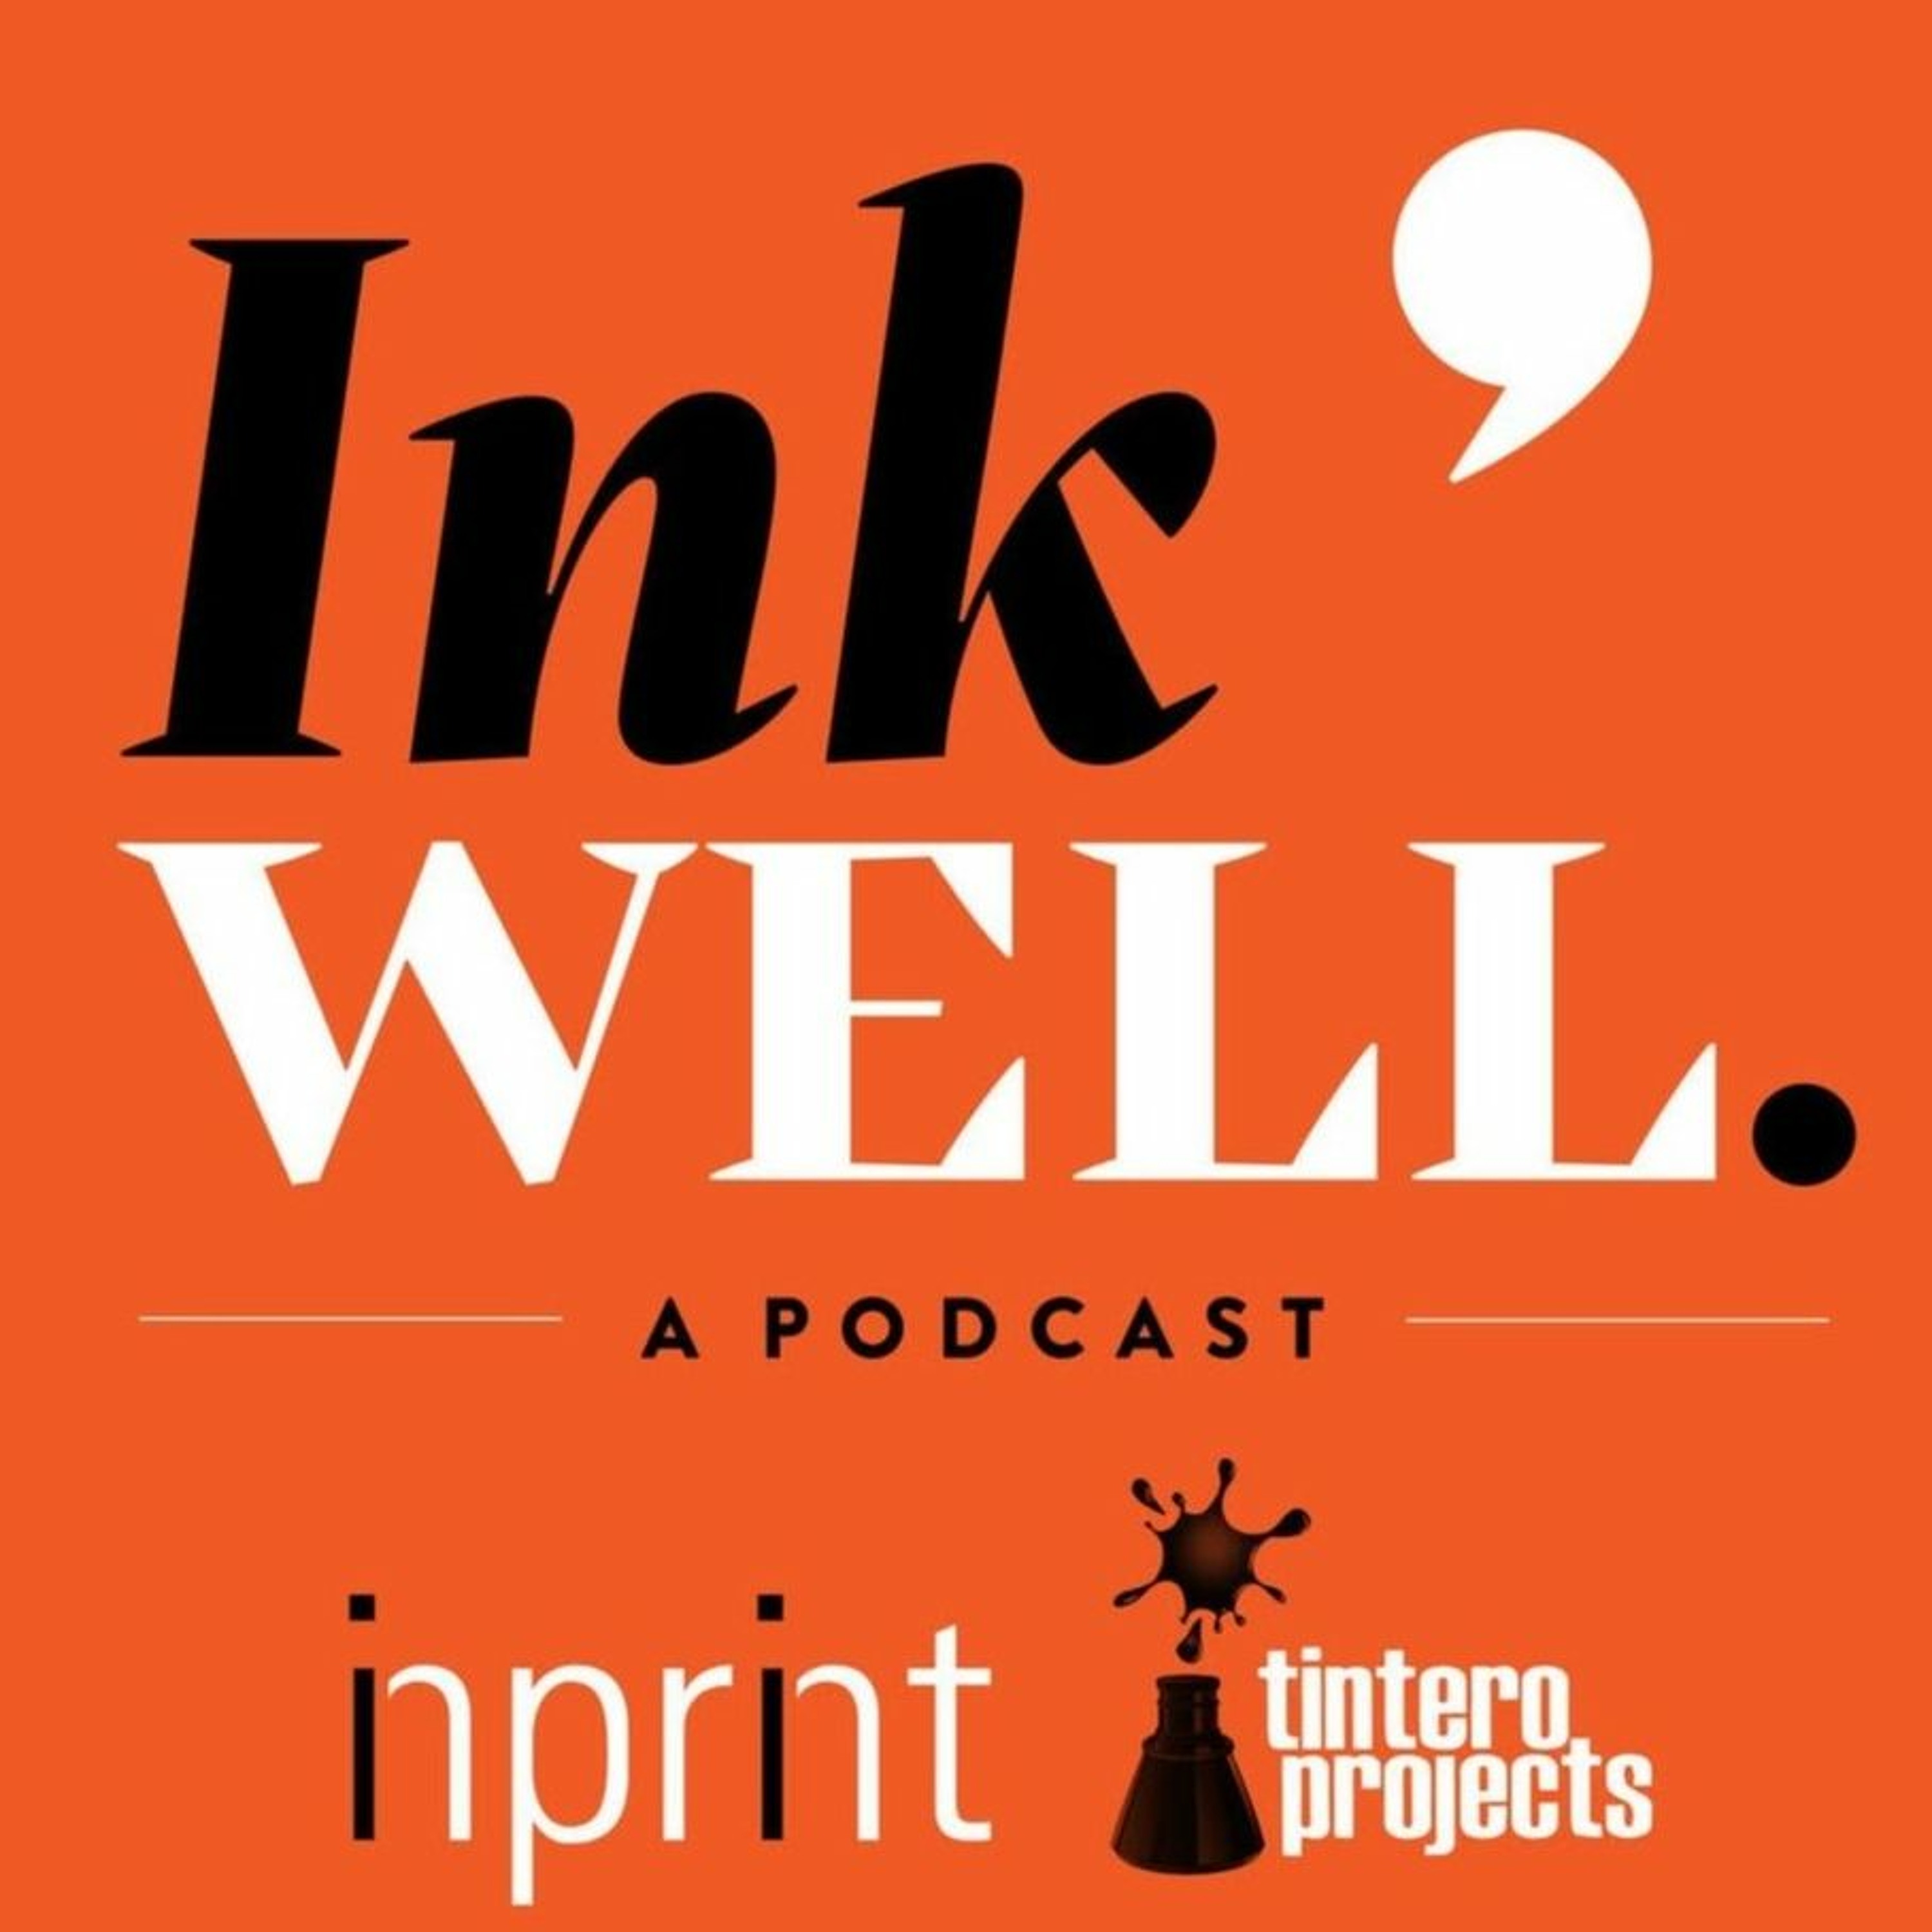 Ink Well S2 E5 featuring Ching-In Chen